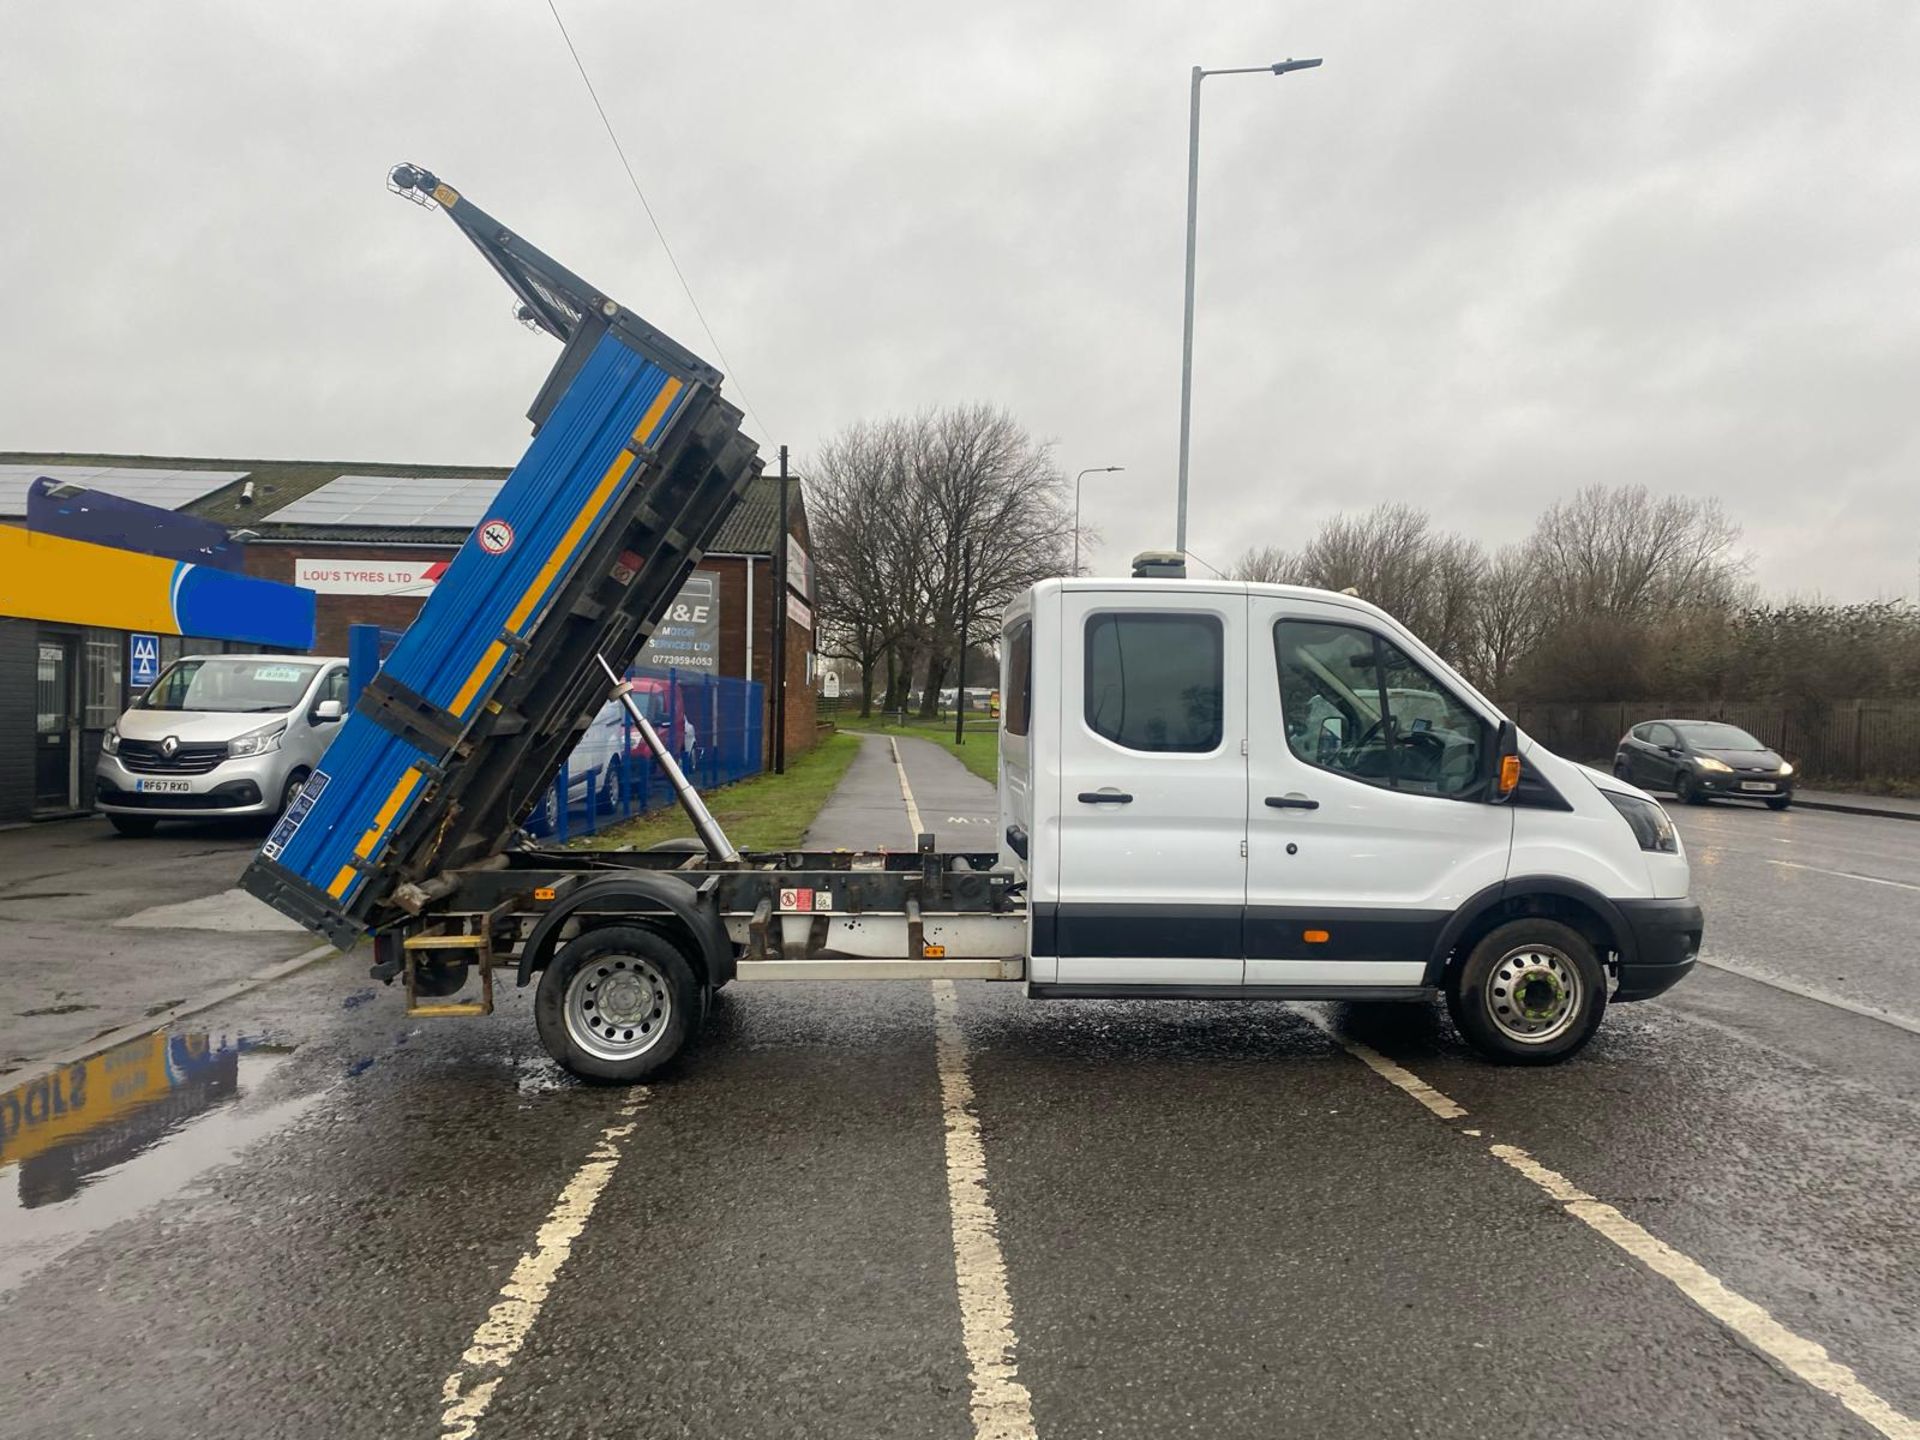 2018 18 FORD TRANSIT 470 TIPPER - 90K MILES - 4.7 TON GROSS - 3 SEATS - RARE TIPPER - TOWBAR. - Image 8 of 15